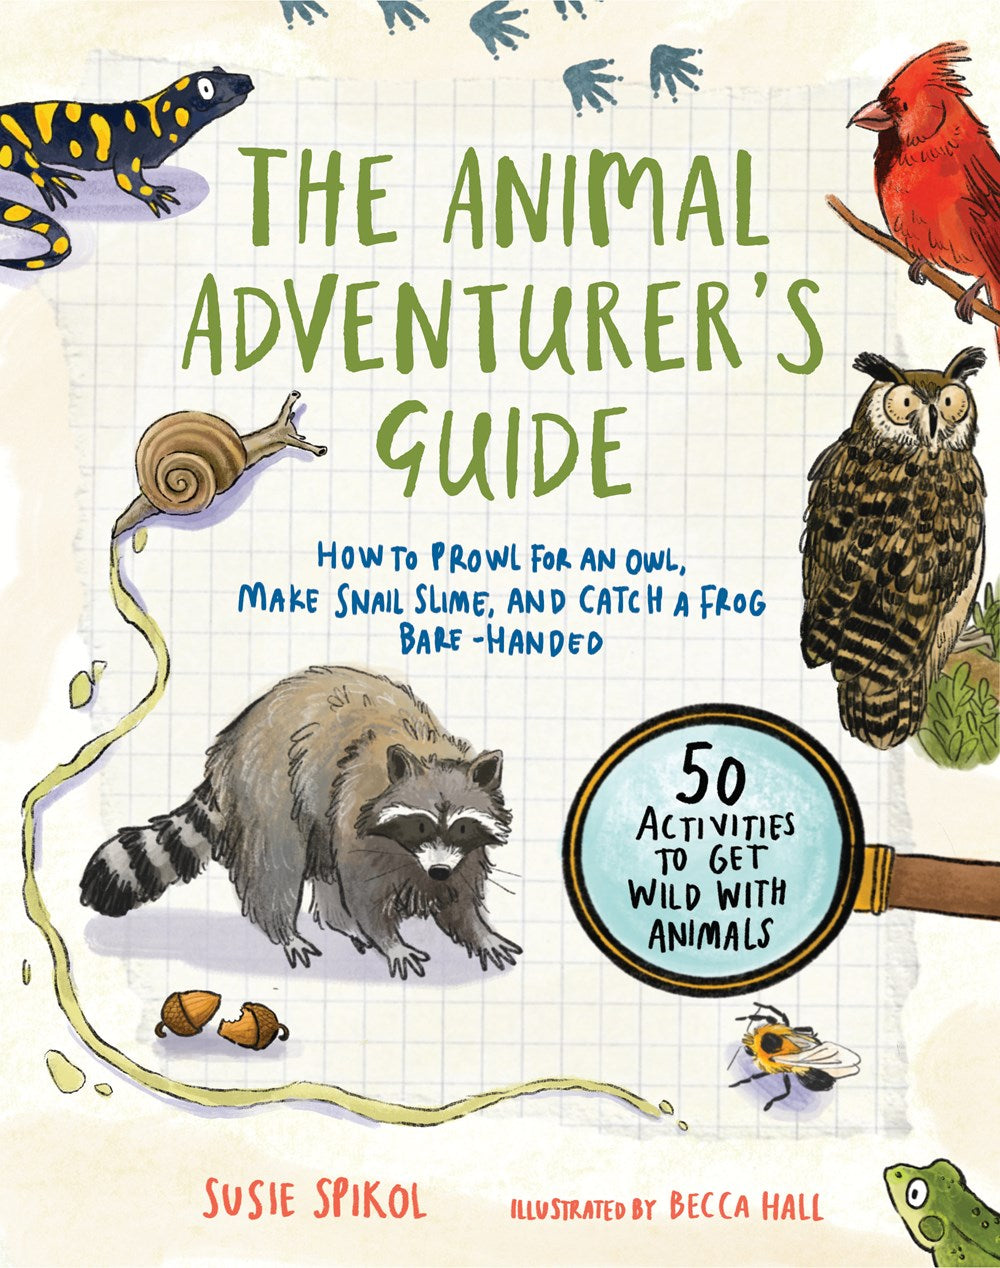 The Animal Adventurer's Guide : How to Prowl for an Owl, Make Snail Slime, and Catch a Frog Bare-Handed--50 Acti vities to Get Wild with Animals